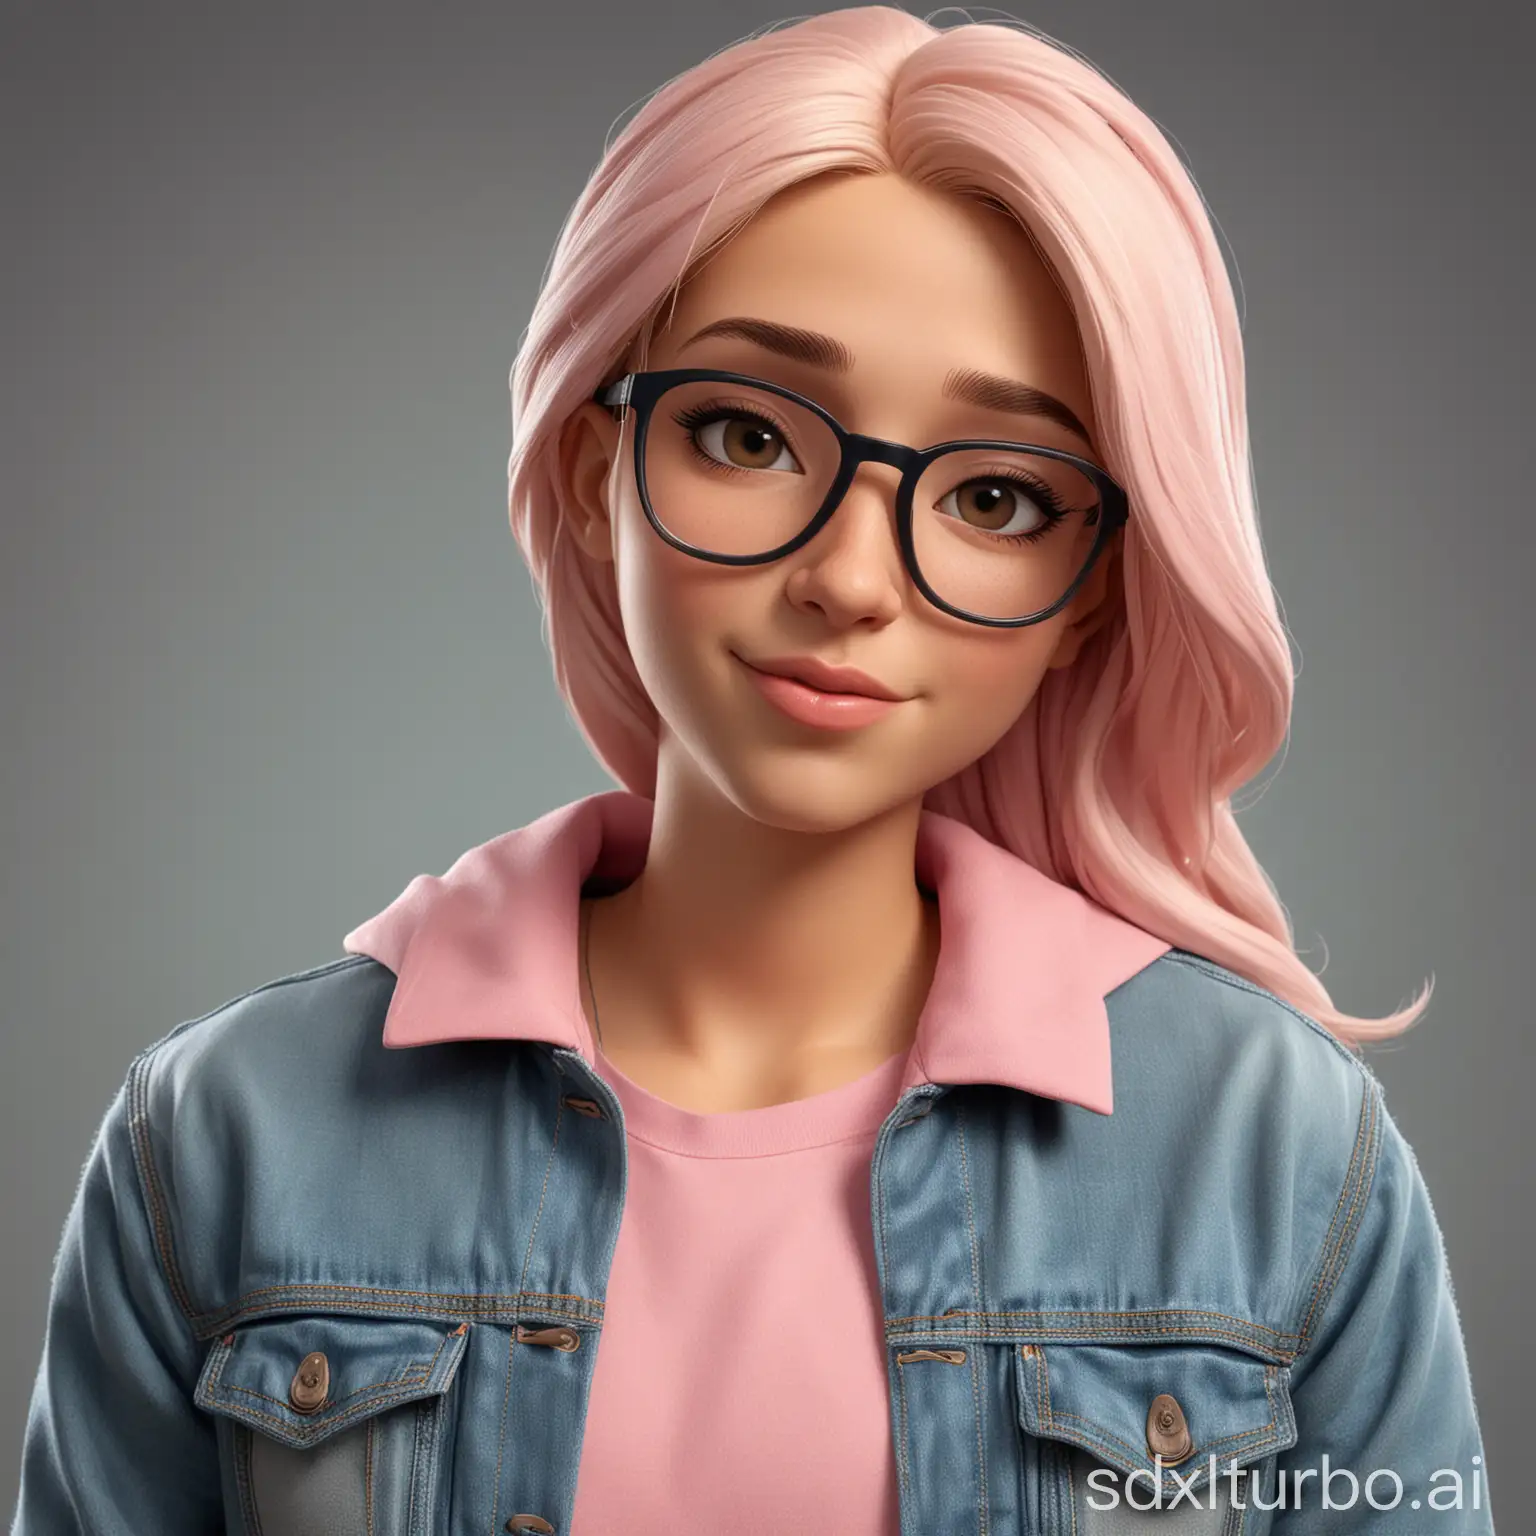 A Caricature 3D realistic cartoon style half body with a big head. A 20 year old man stood at the front wearing a denim jacket with a clearly visible collar and blonde hair without wearing glasses. Beside him, stood a beautiful 20 year old woman wearing glasses, only part of her body visible, wearing a cream colored sweater and a pink hijab. They stand close to each other, looking focused at the camera in selfie style. The background color matches their clothes.